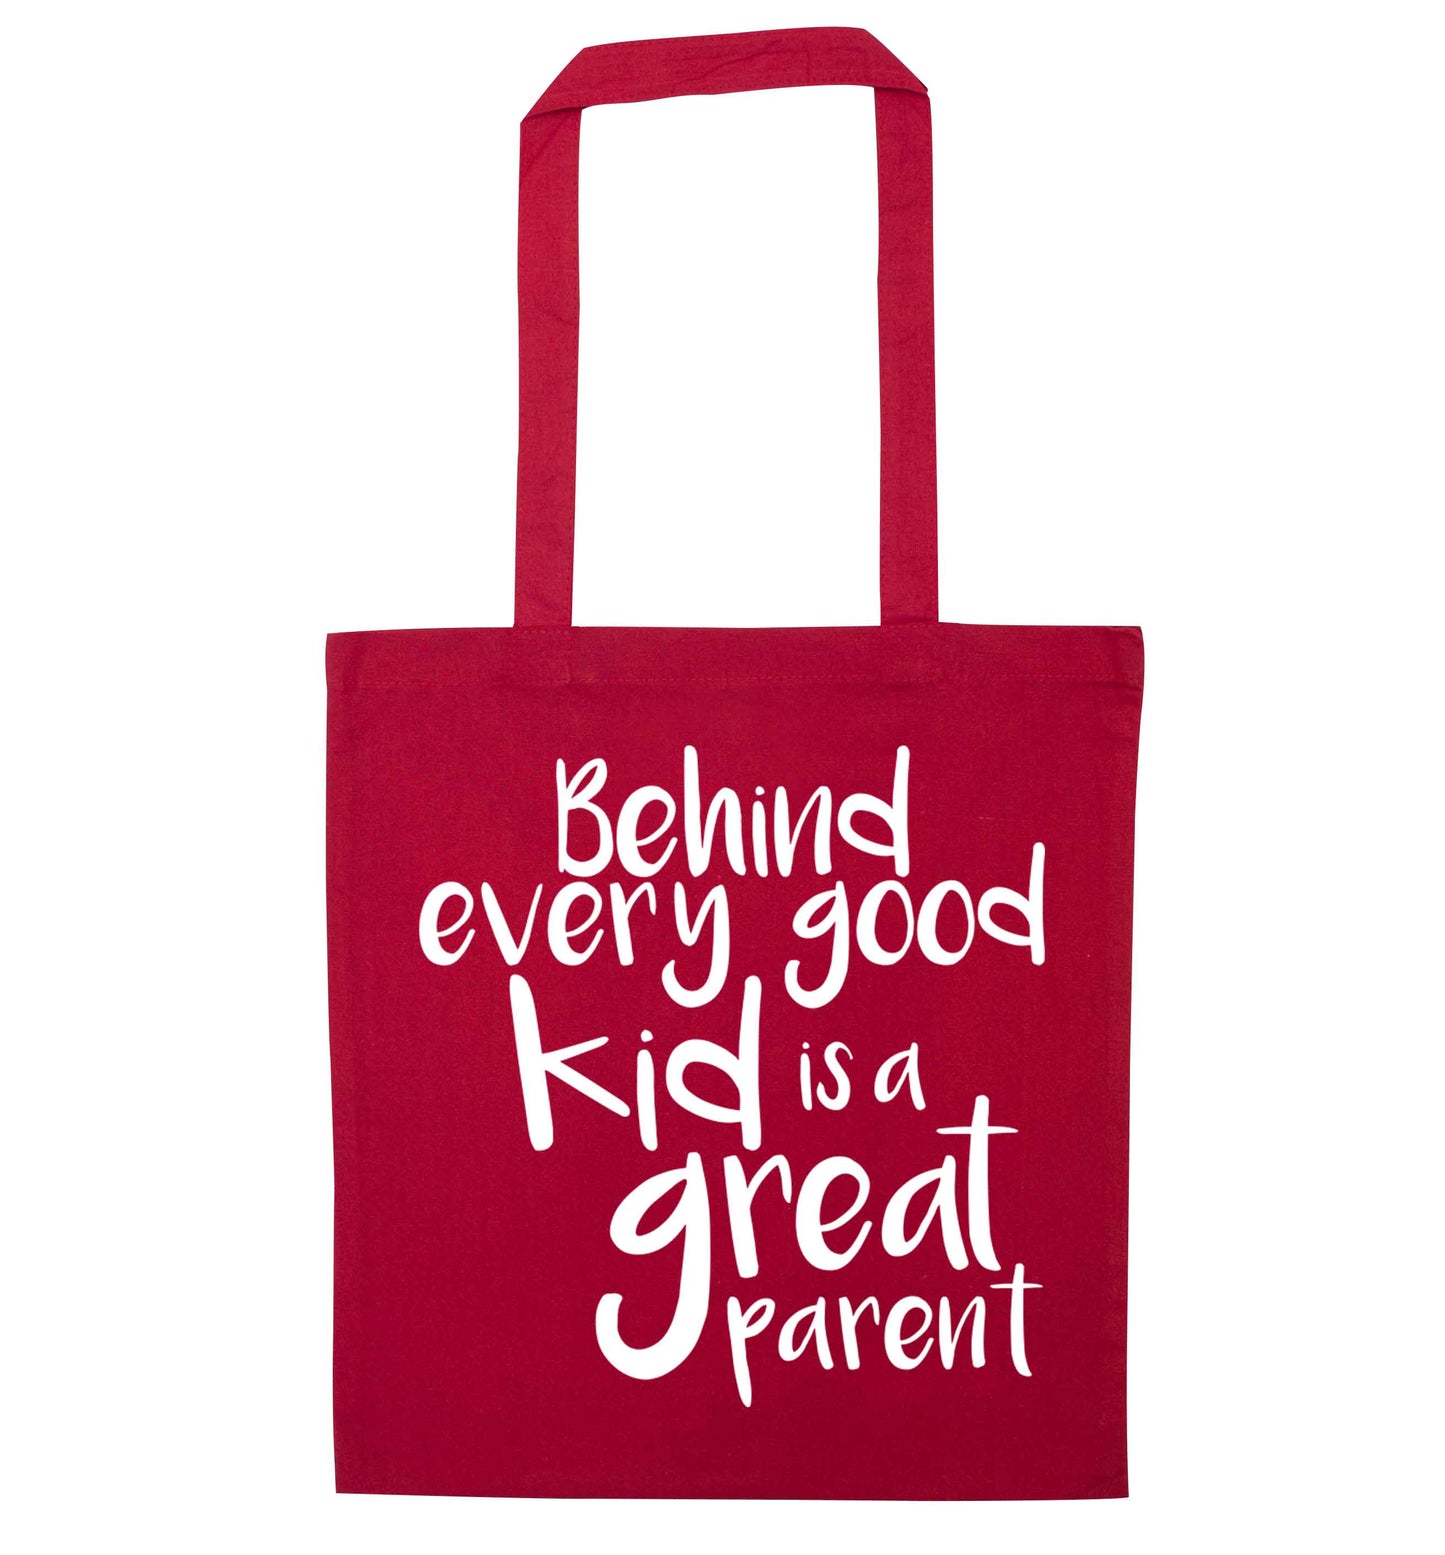 Behind every good kid is a great parent red tote bag